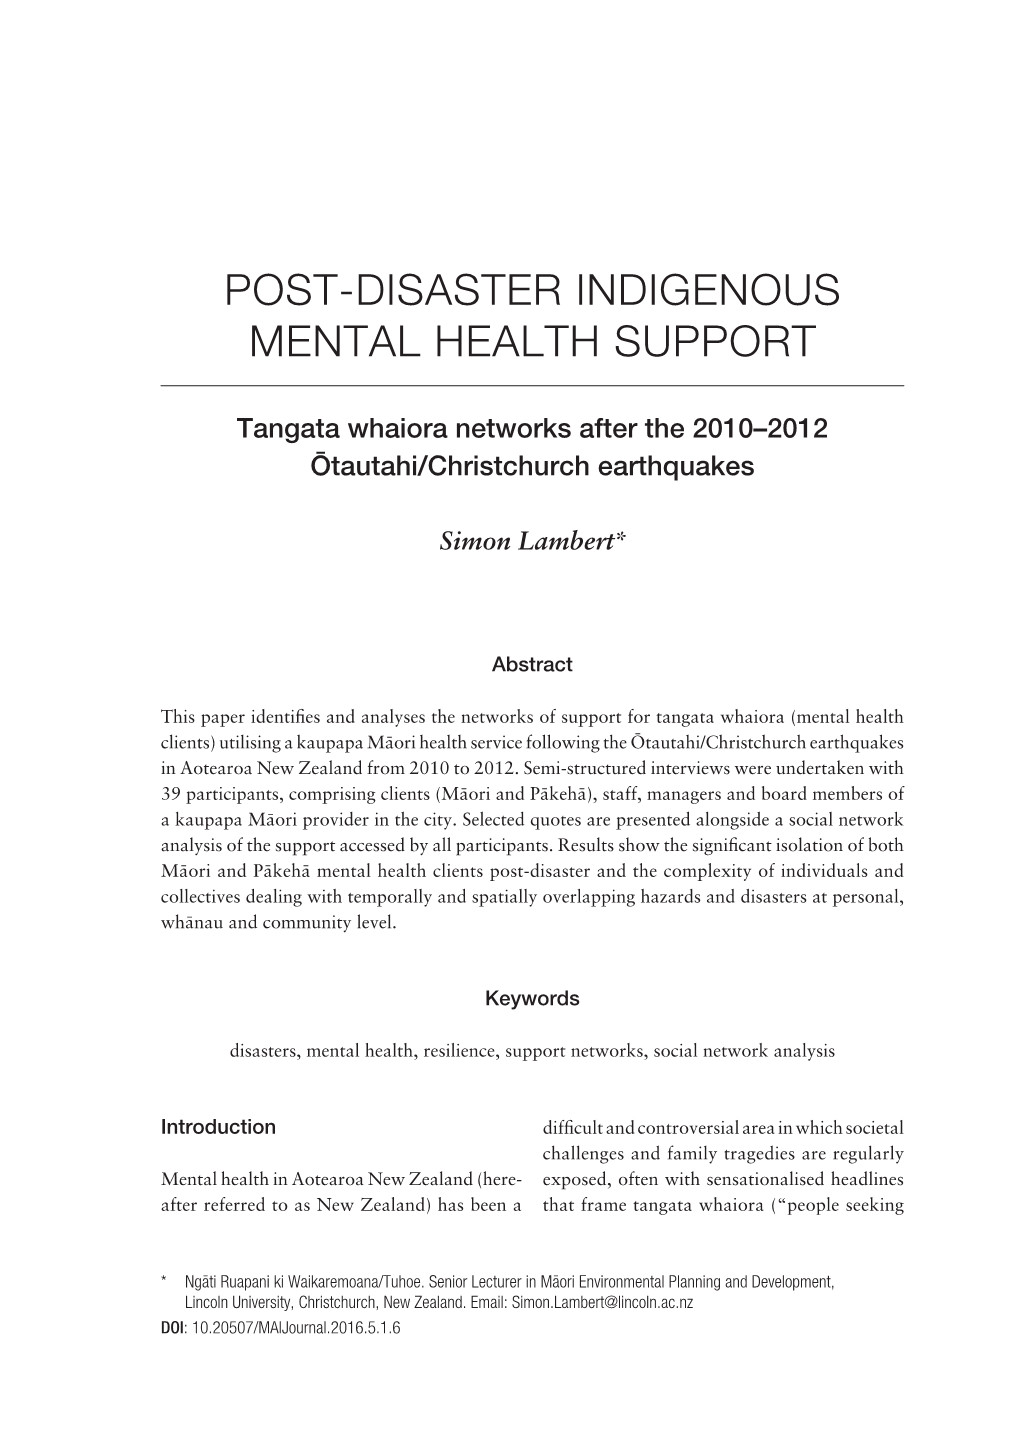 Disaster Indigenous Mental Health Support